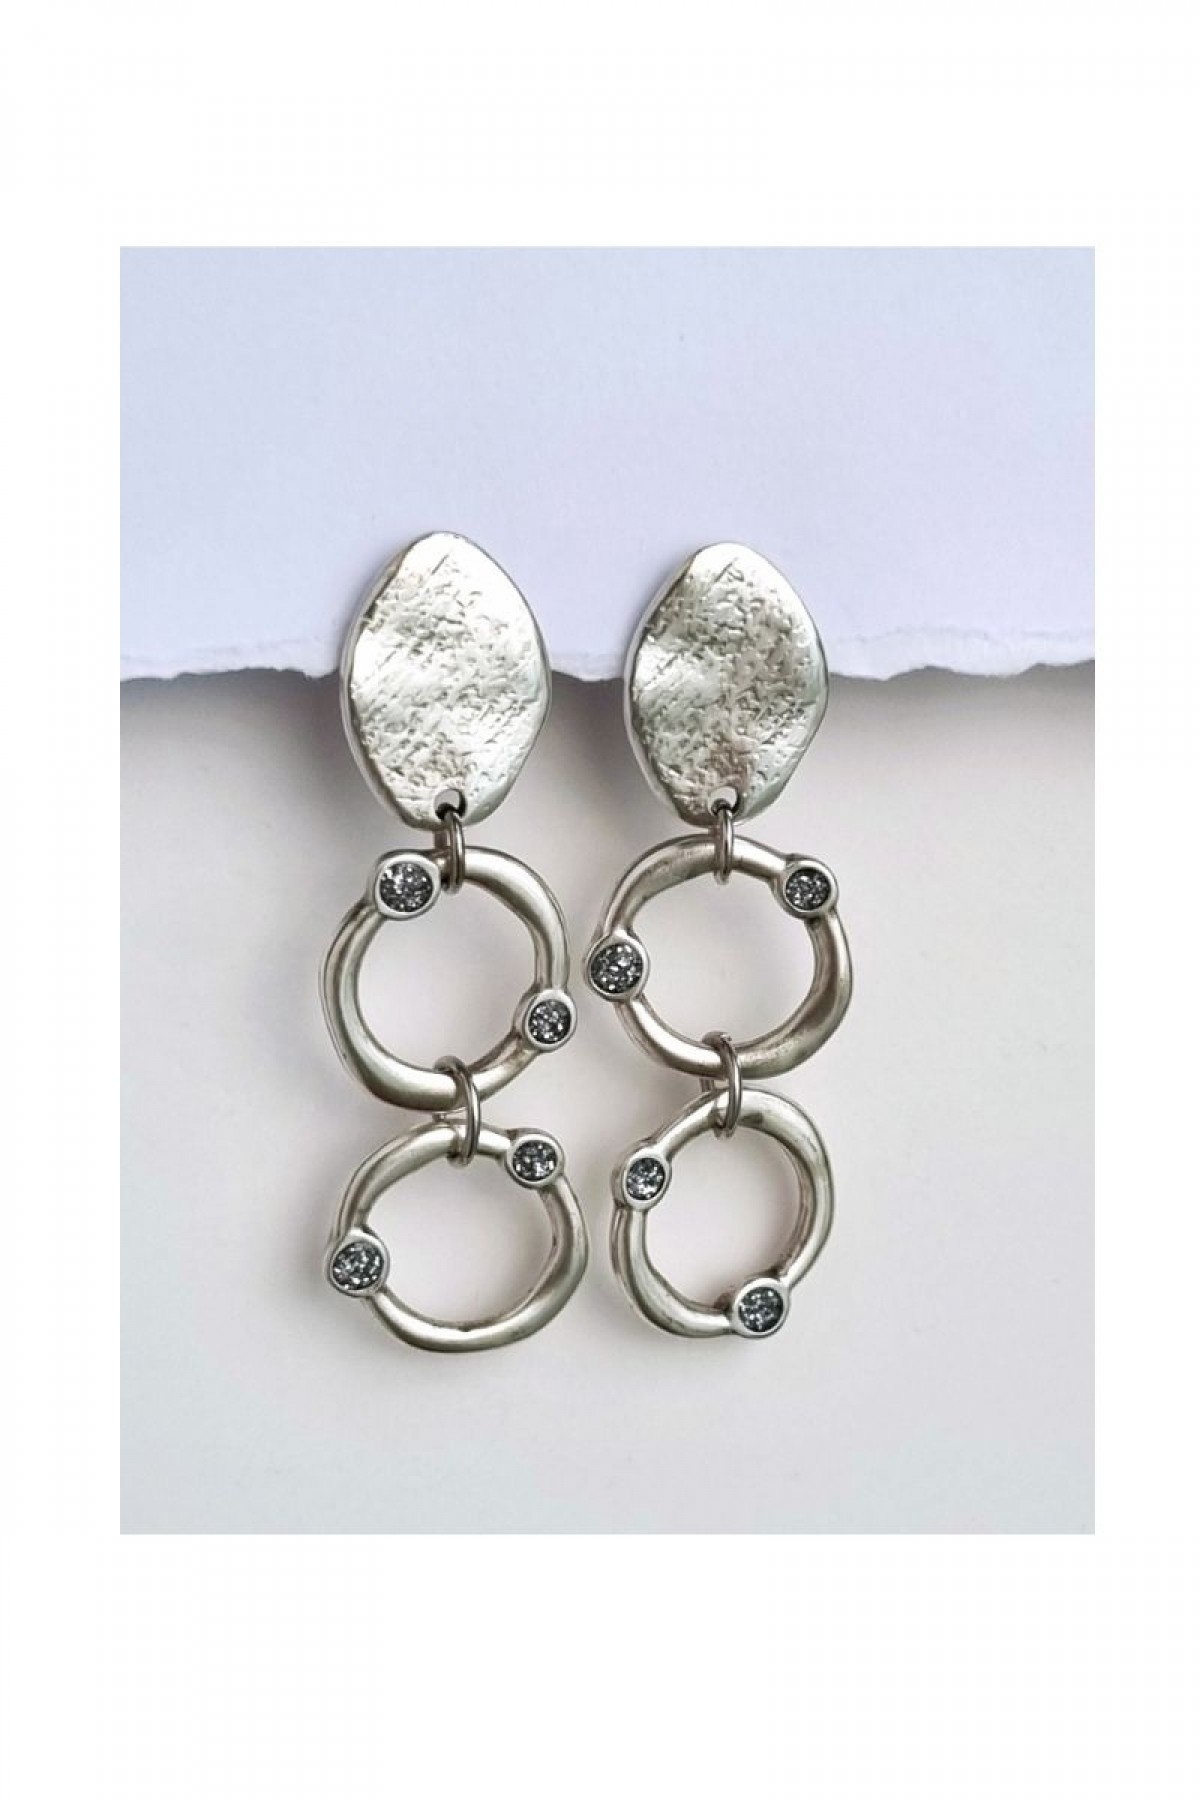 EARRINGS MADE OF SILVER PLATED BRASS by Eve Kay